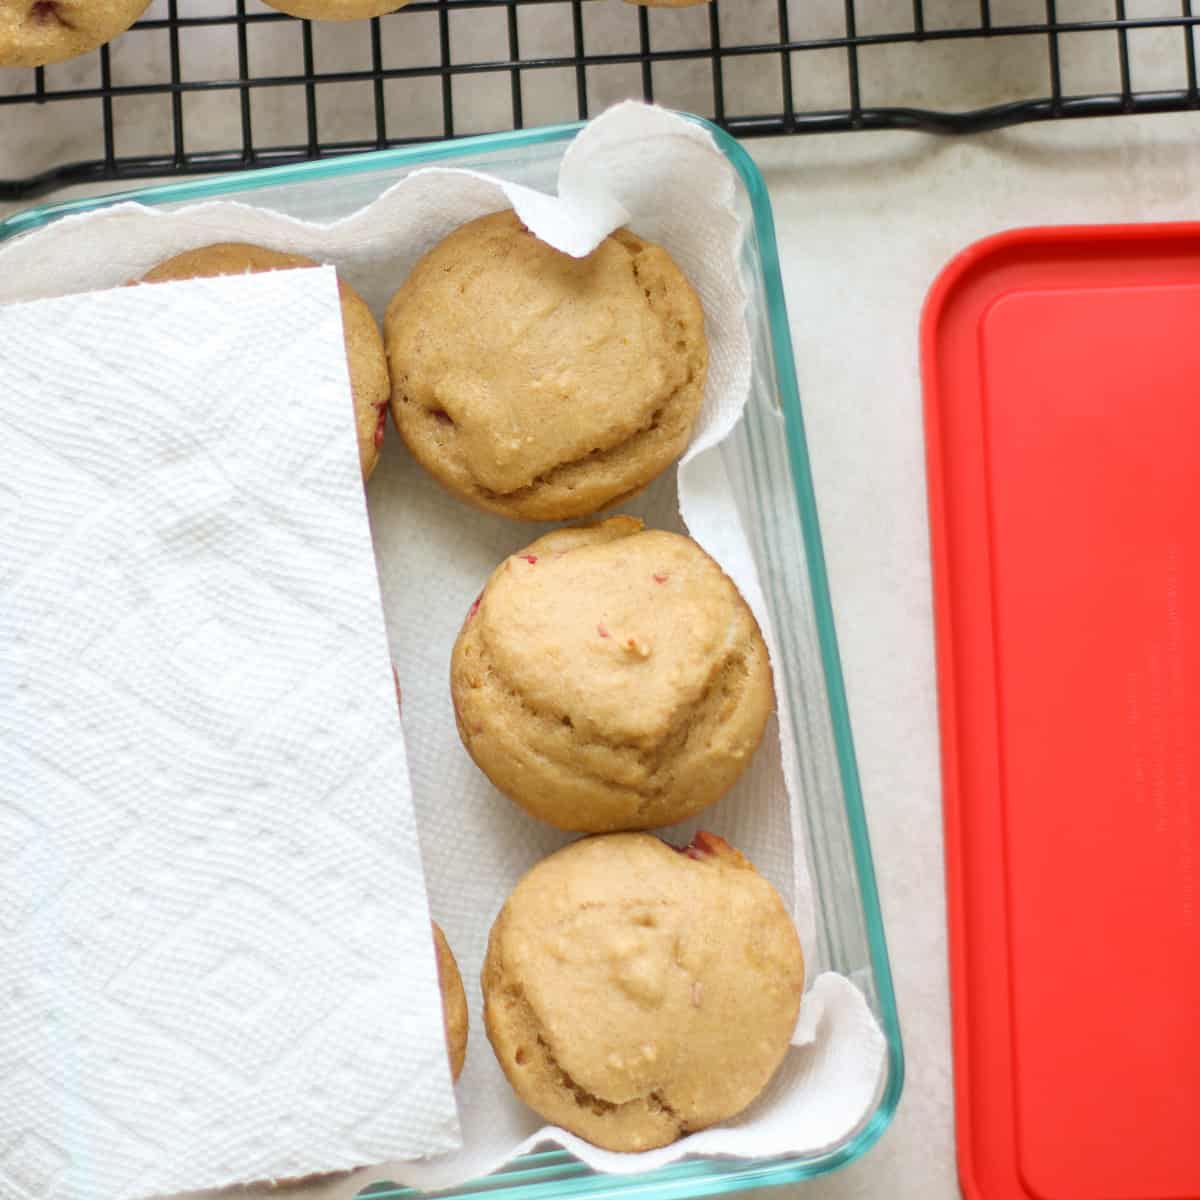 How To Properly Store Muffins to Keep Them Fresh Longer, Baking Nook